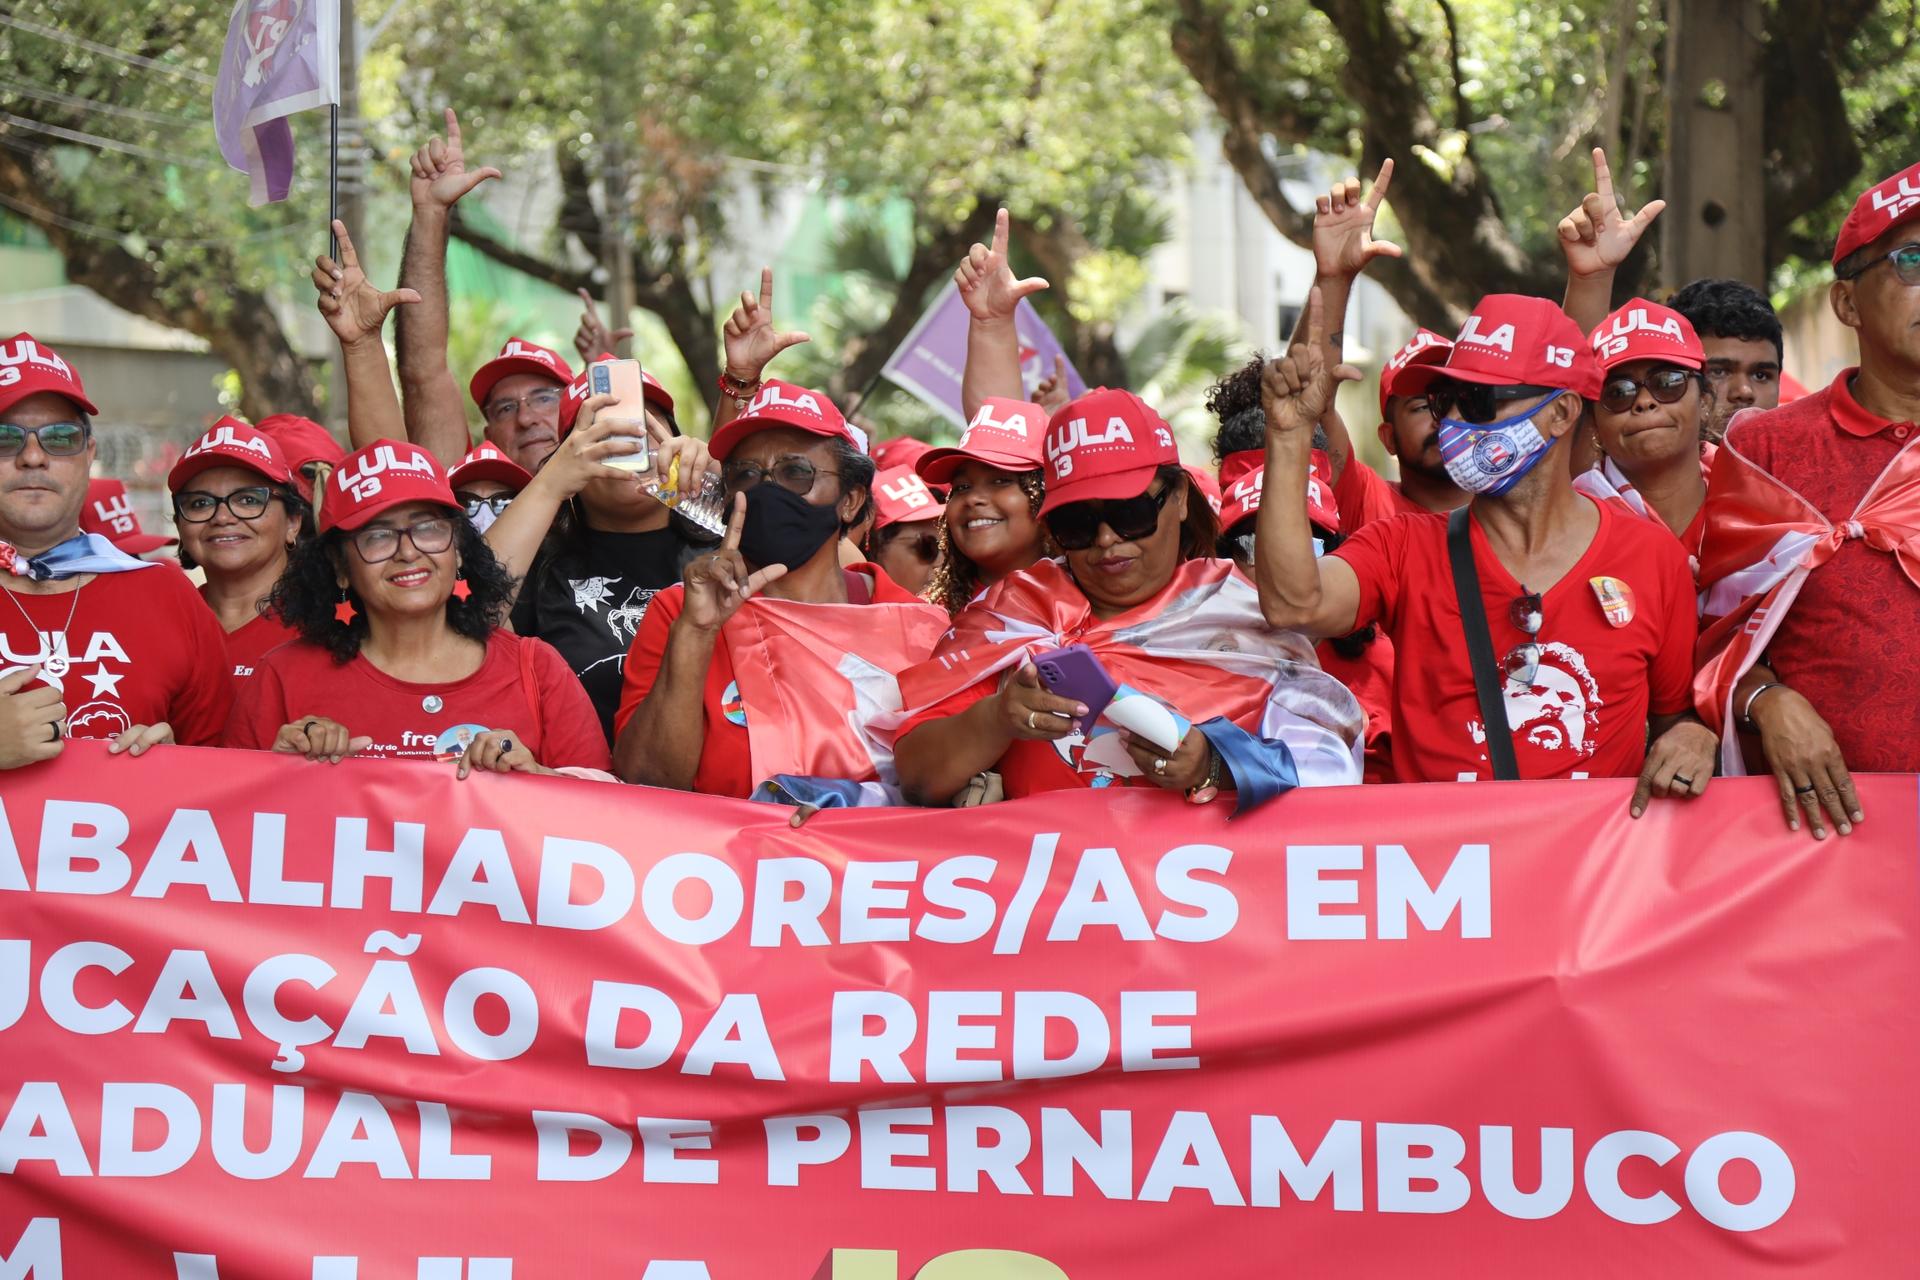 Lula supporters hold a banner